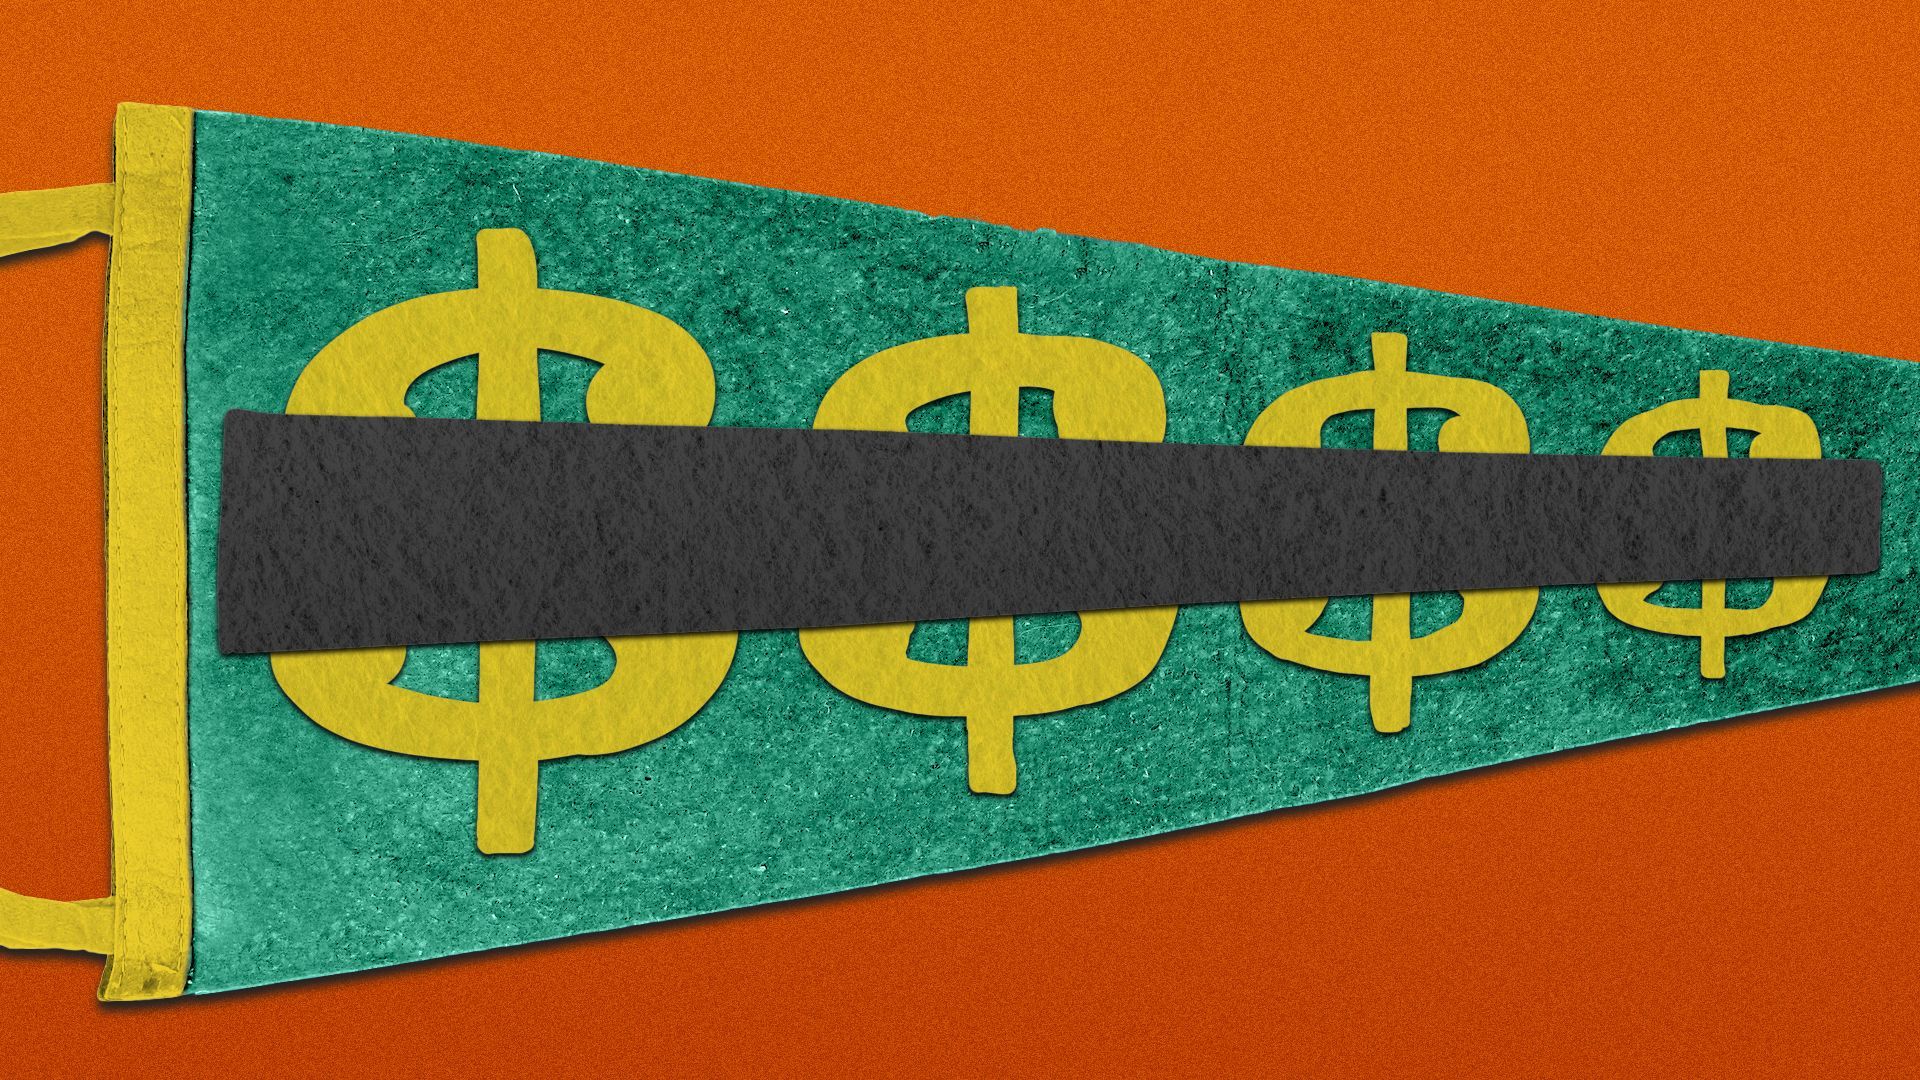 Illustration of a felt pennant with dollar signs on it, and a redaction box across the dollar signs.